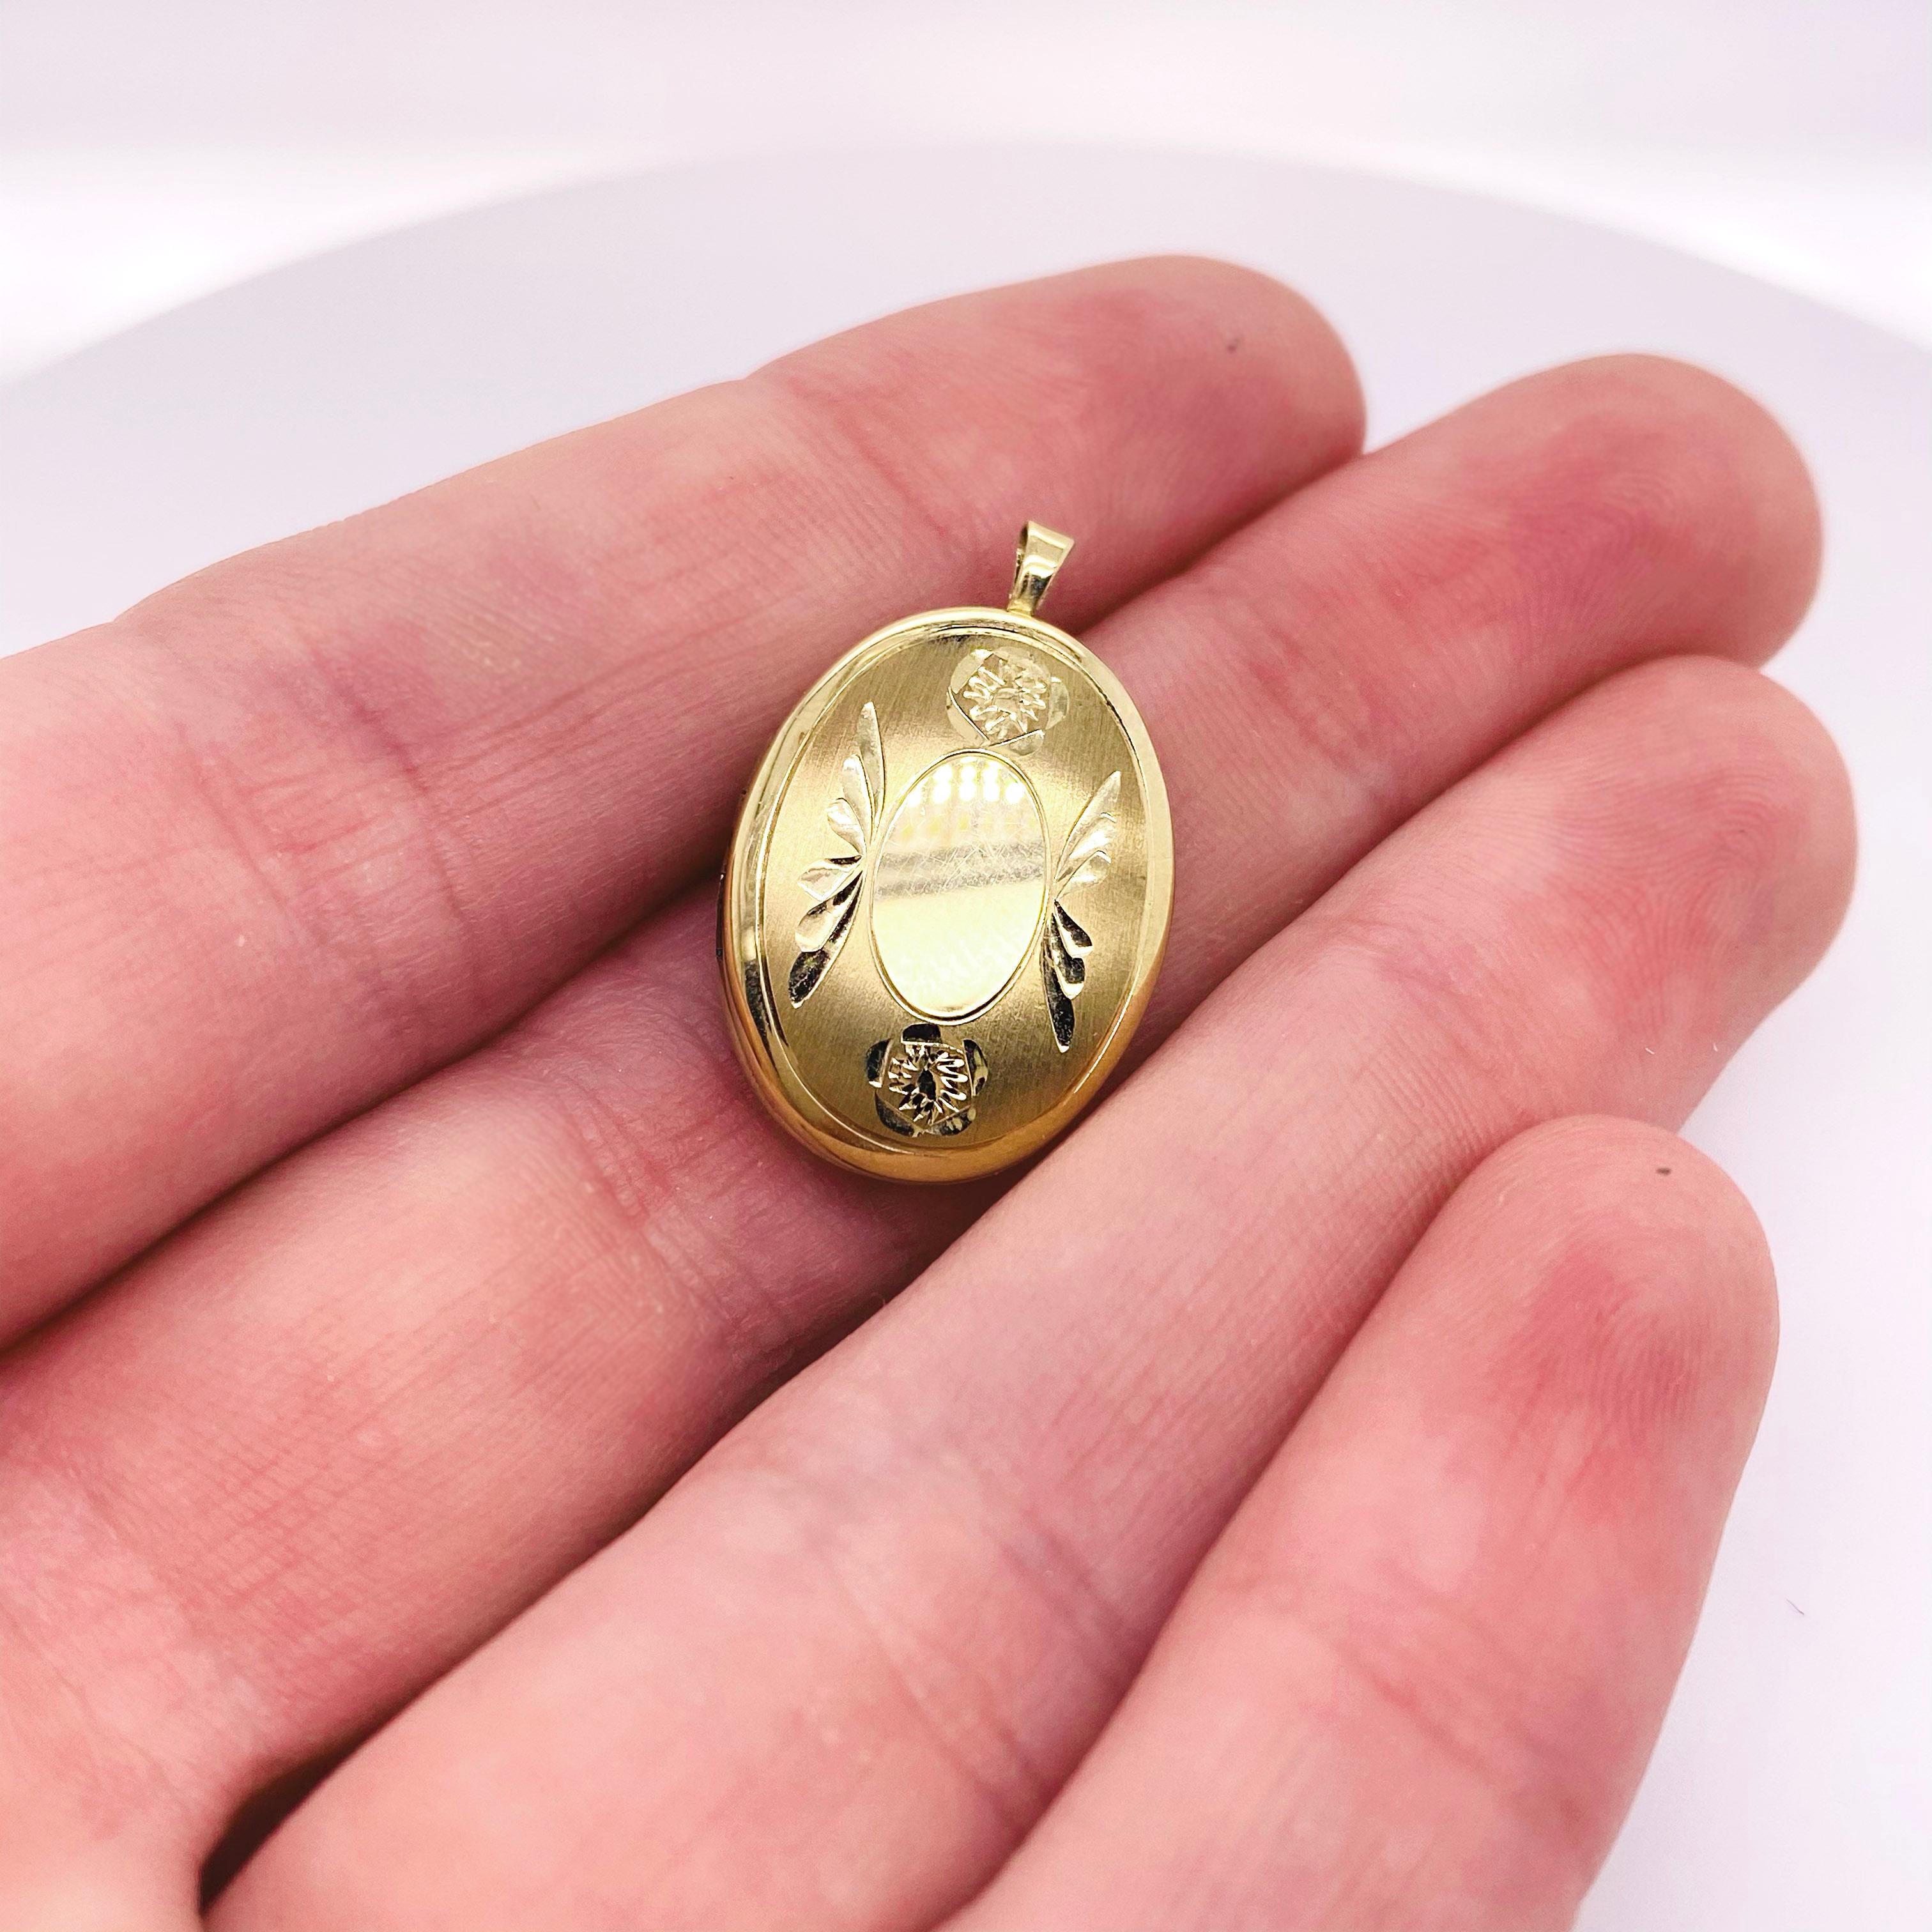 You won't believe how stunning and versatile this locket is! This gorgeous 14K yellow gold floral necklace is fashionable enough to wear every day yet special enough to wear on your wedding day. Pick a picture or small object close to your heart and